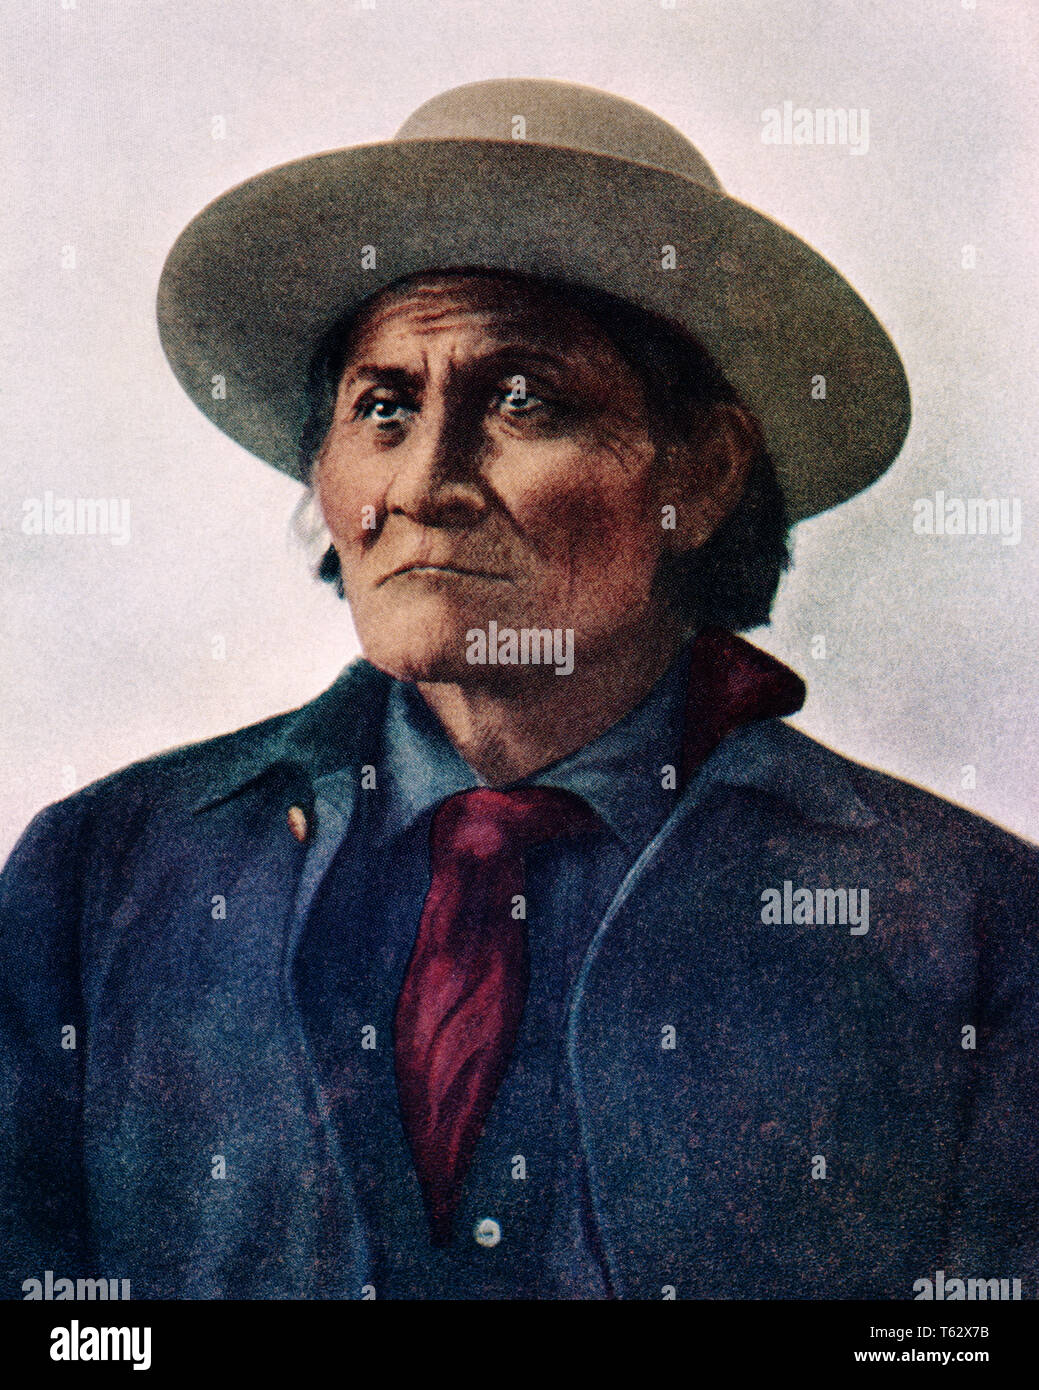 1800s 1900s PORTRAIT OF NATIVE AMERICAN INDIAN MESCALERO CHIRICAHUA APACHE LEADER GERONIMO - ki4305 CPC001 HARS WARRIOR COURAGE EXCITEMENT KNOWLEDGE LEADERSHIP POWERFUL OF AUTHORITY ARIZONA CELEBRITY ESCAPE STYLISH NATIVE AMERICAN GERONIMO NATIVE AMERICANS APACHE AZ INDIGENOUS OLD FASHIONED Stock Photo